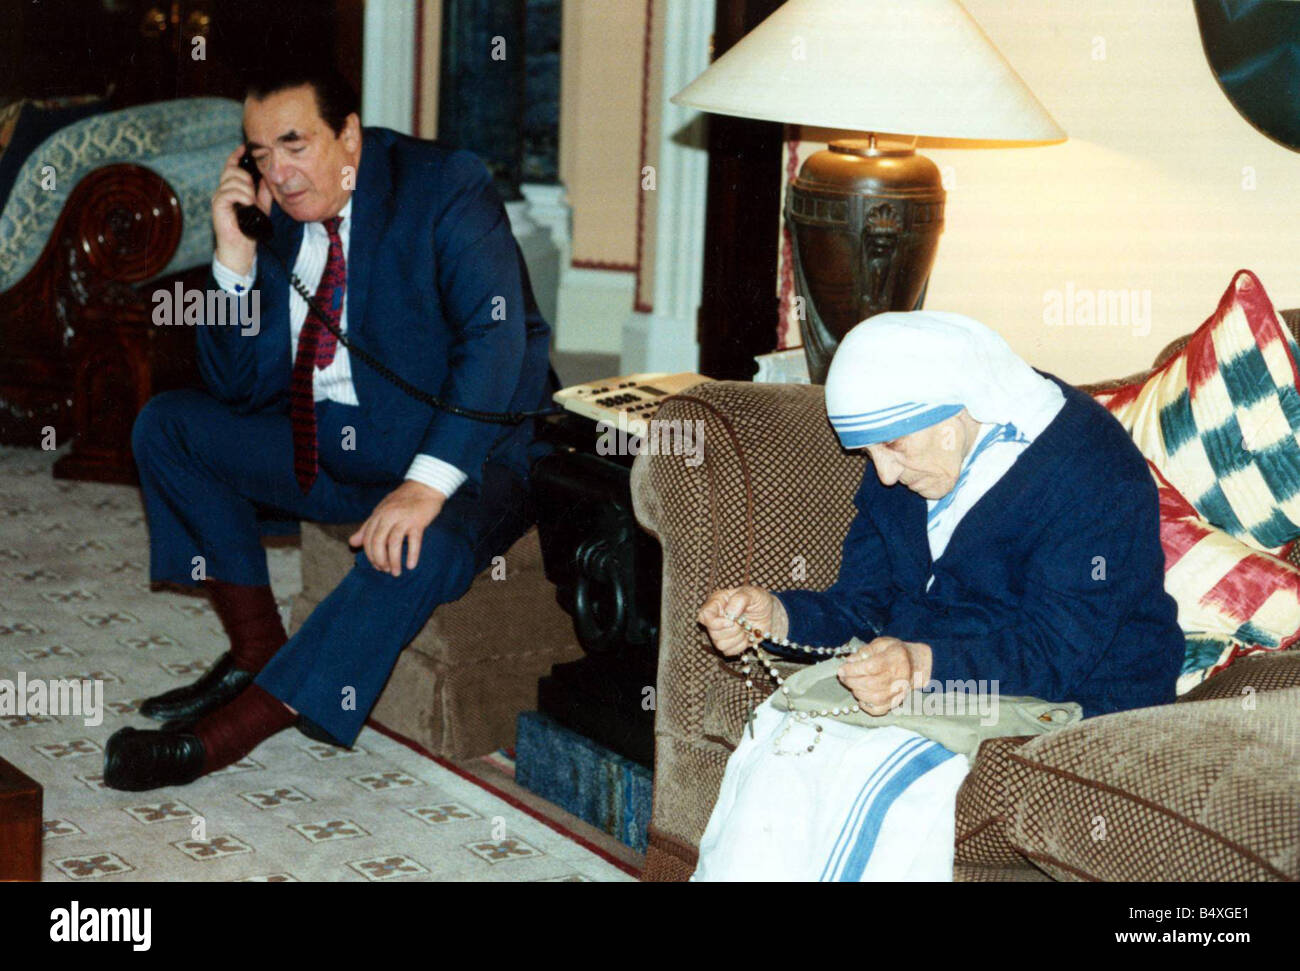 robert-maxwell-on-telephone-and-mother-teresa-with-rosary-communication-B4XGE1.jpg